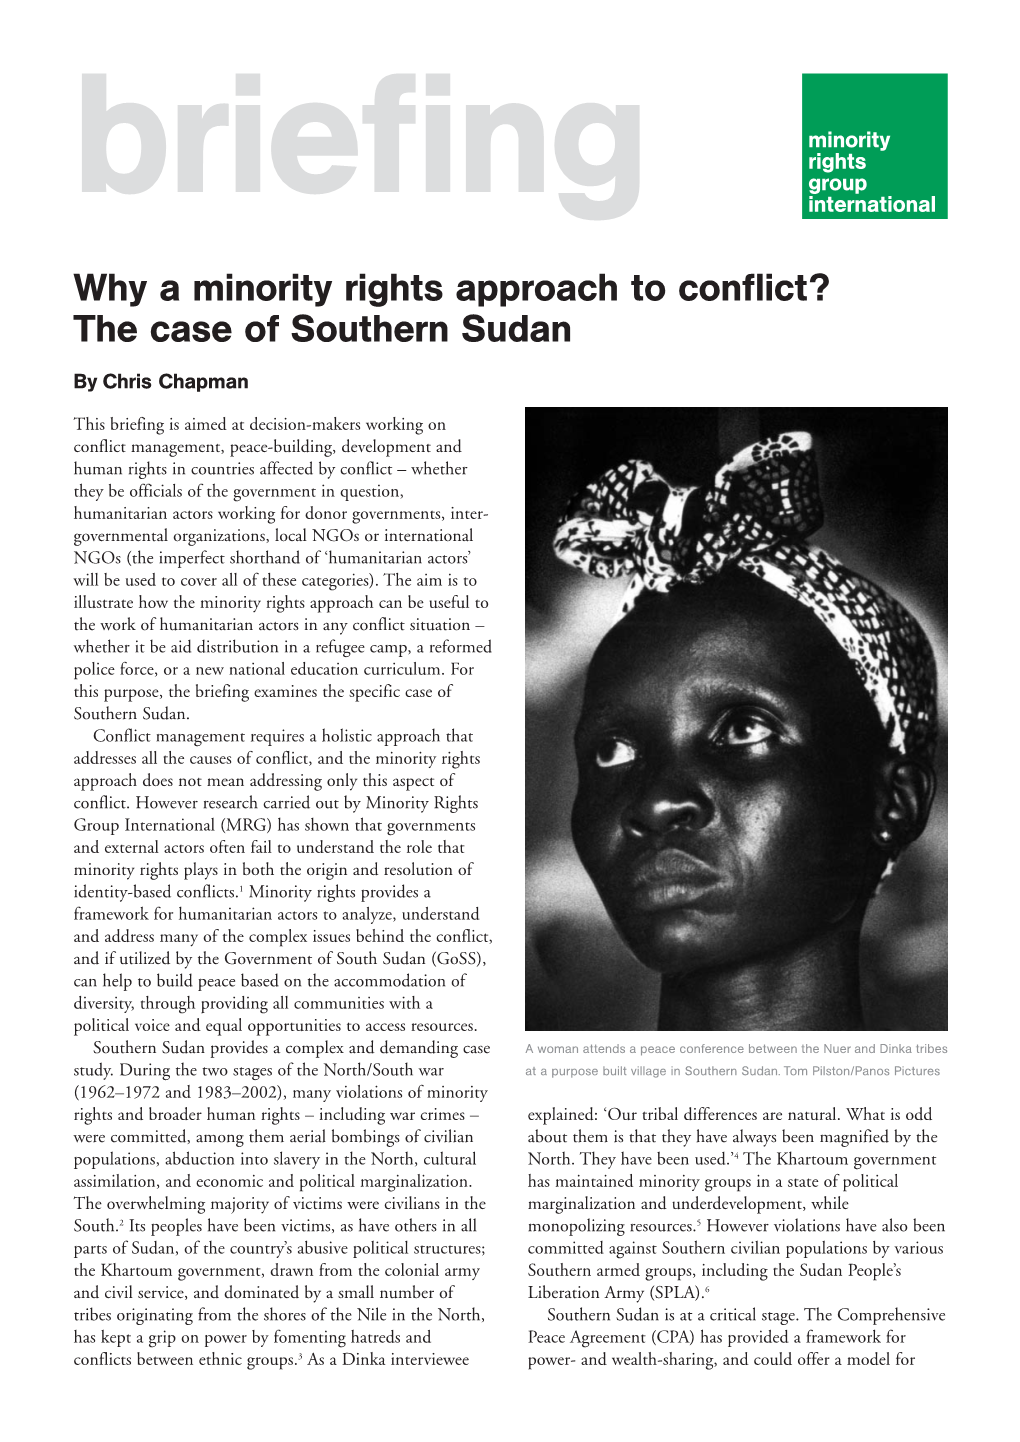 Why a Minority Rights Approach to Conflict? the Case of Southern Sudan